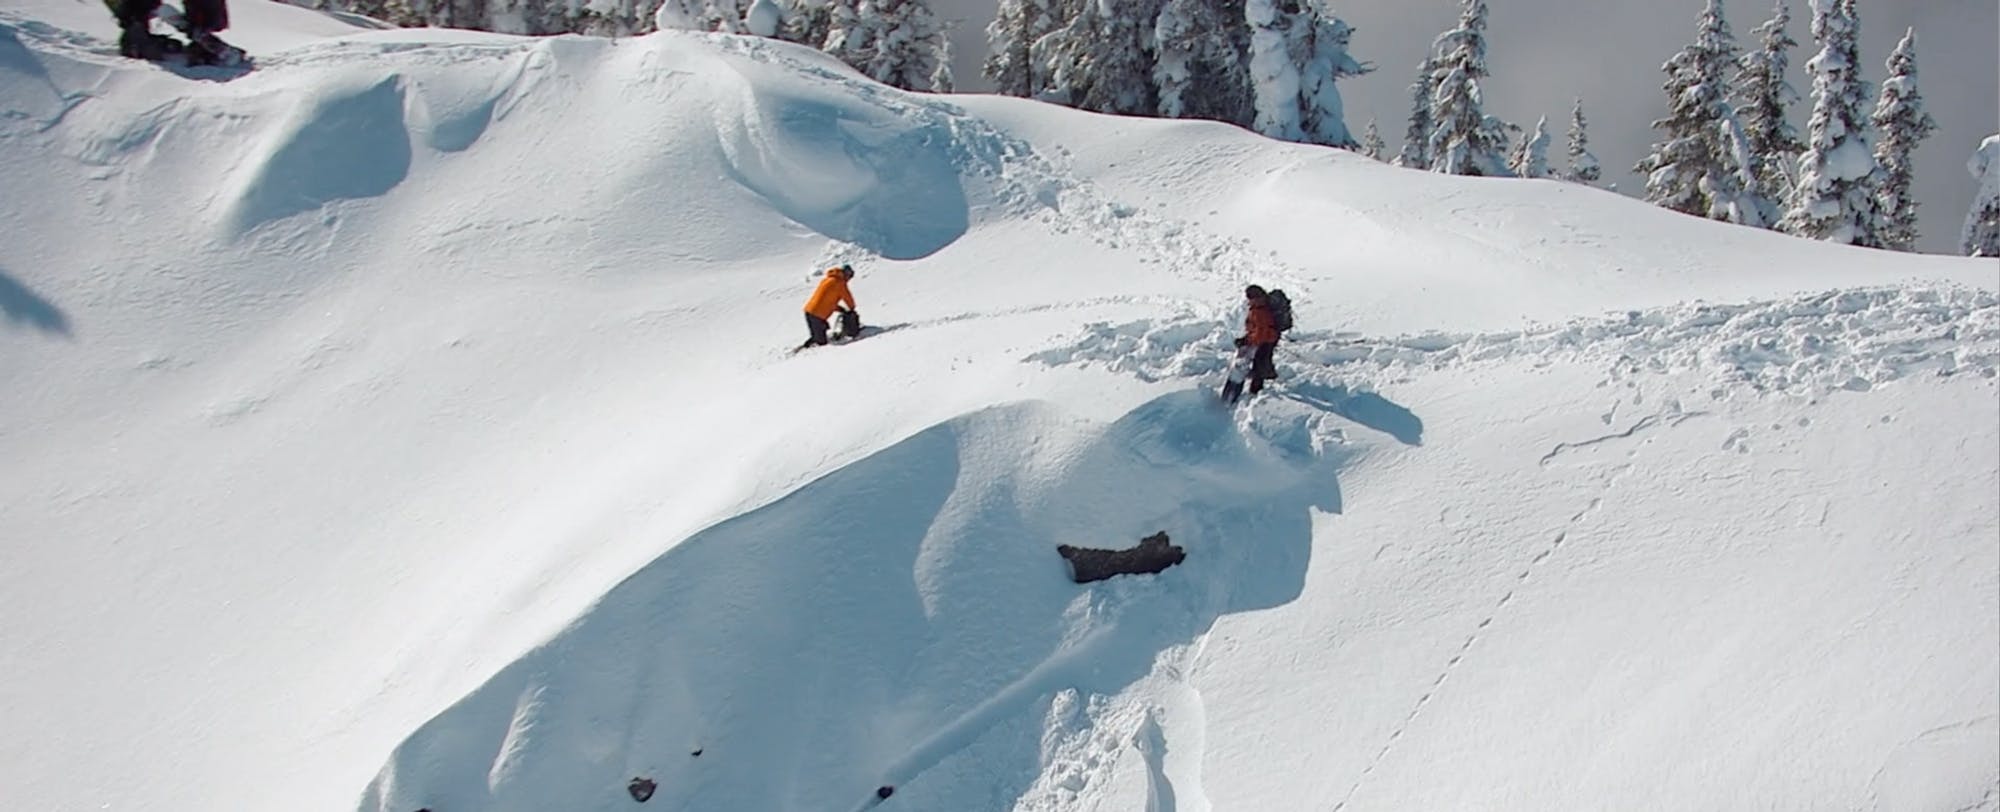 Know Before You Go: An Avalanche Safety PSA